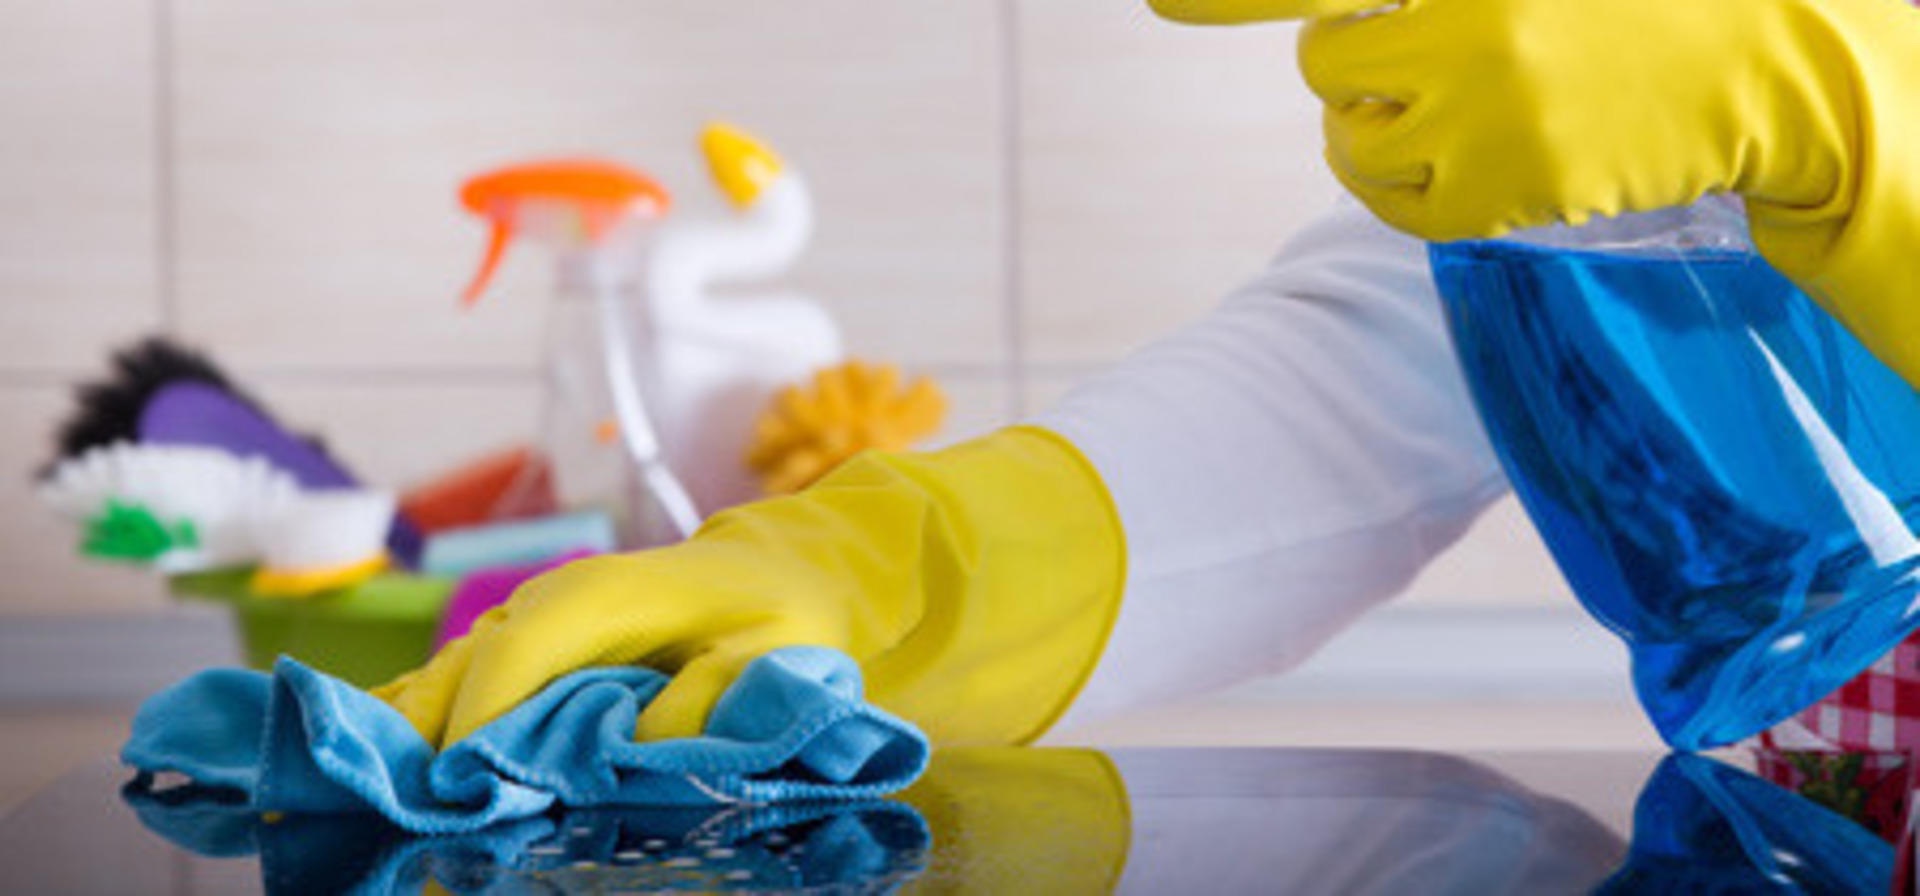 Deep Cleaning Your Marketing or Salesforce